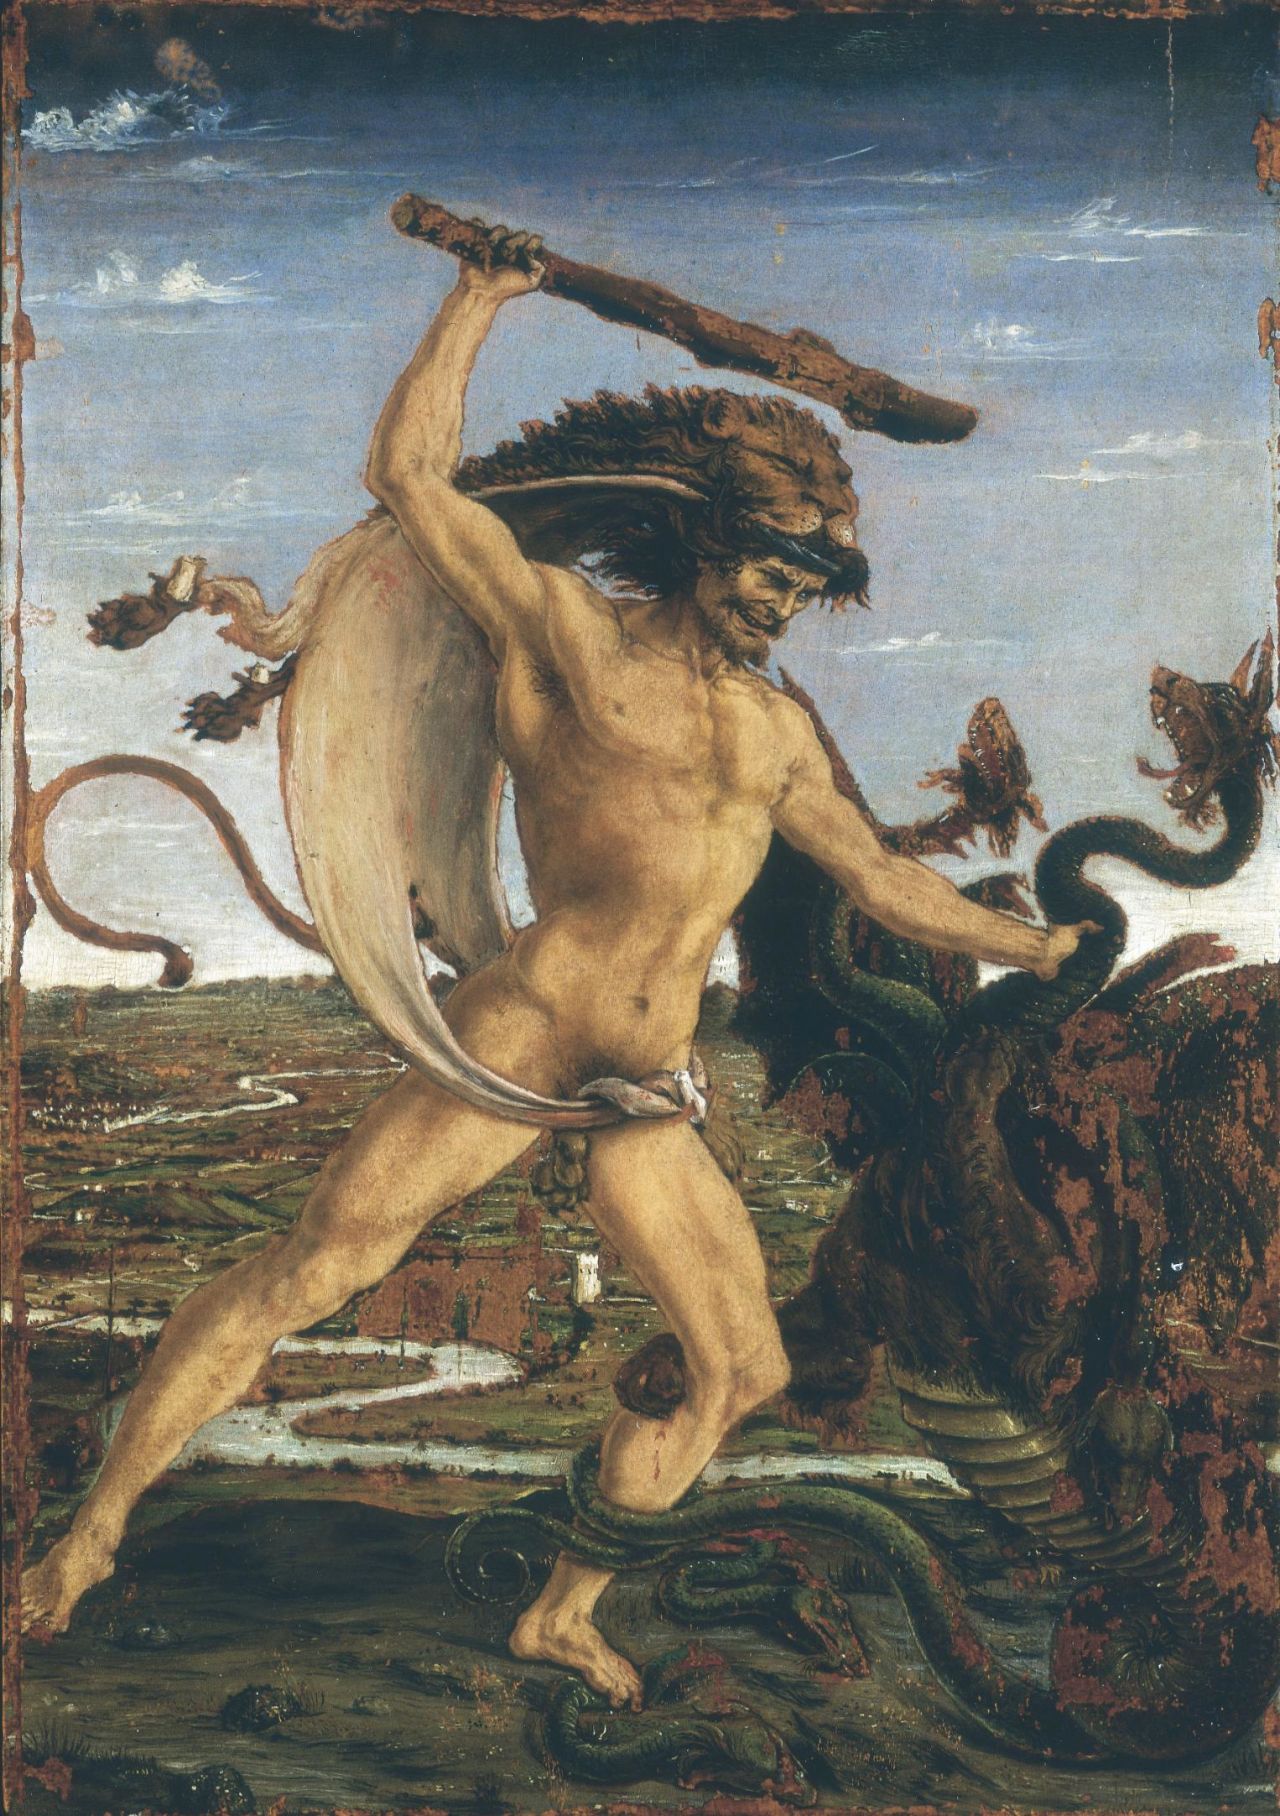 "Hercules and the Hydra" (1475) by Antonio Pollaiolo